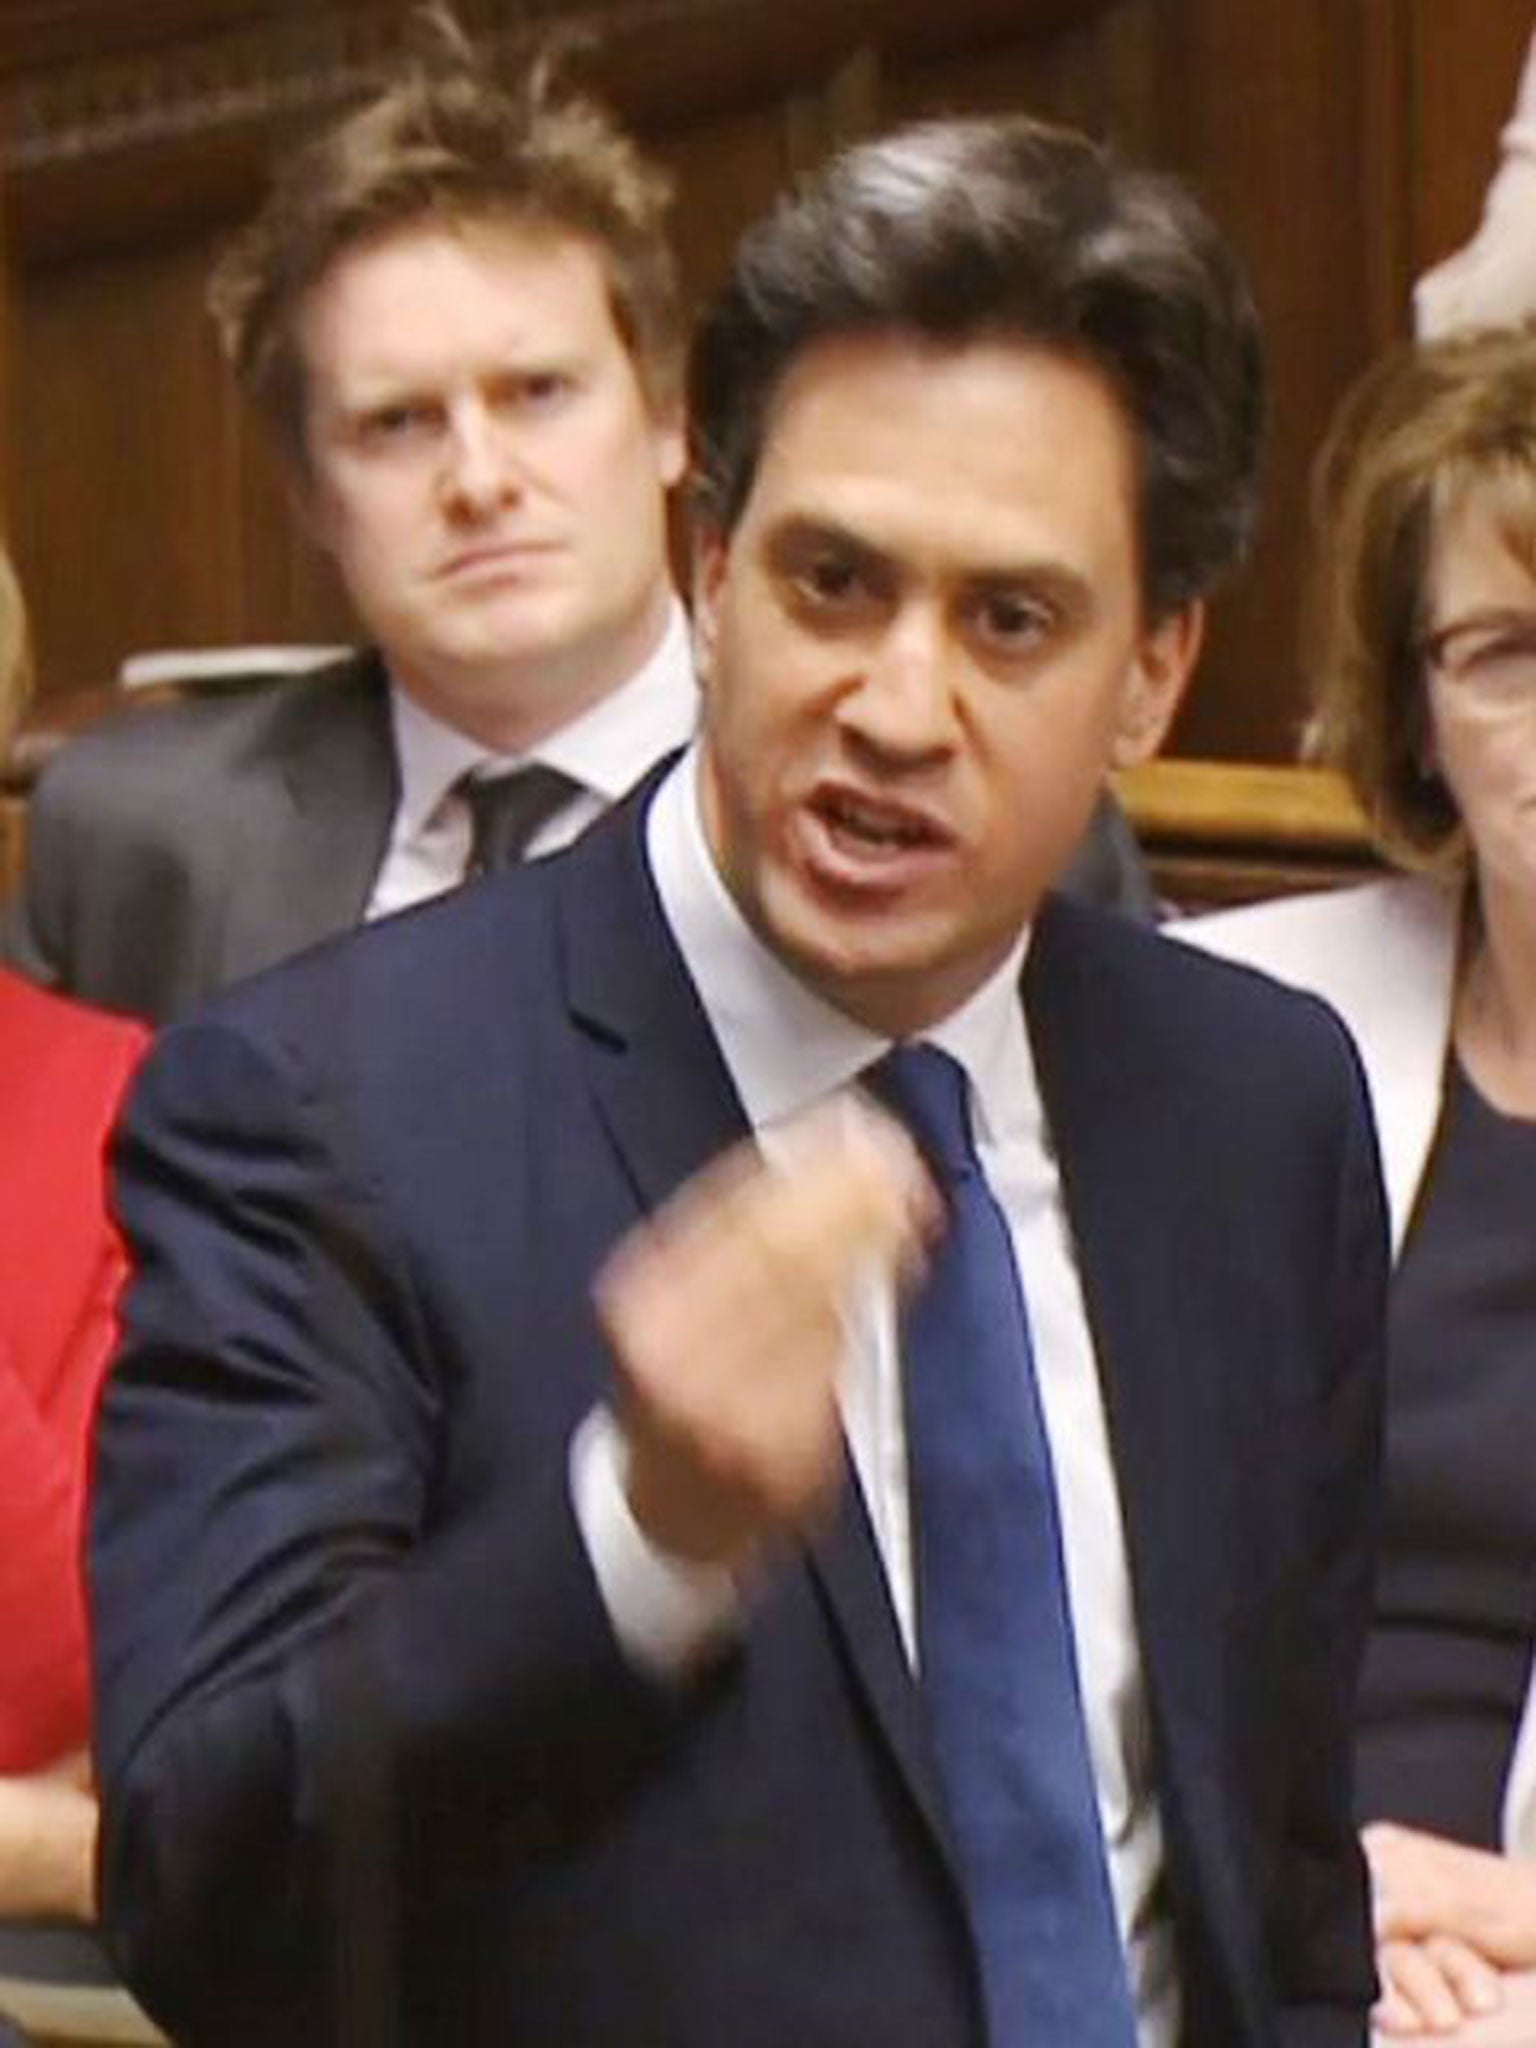 Former Labour leader Ed Miliband laid out his case for staying in the European Union